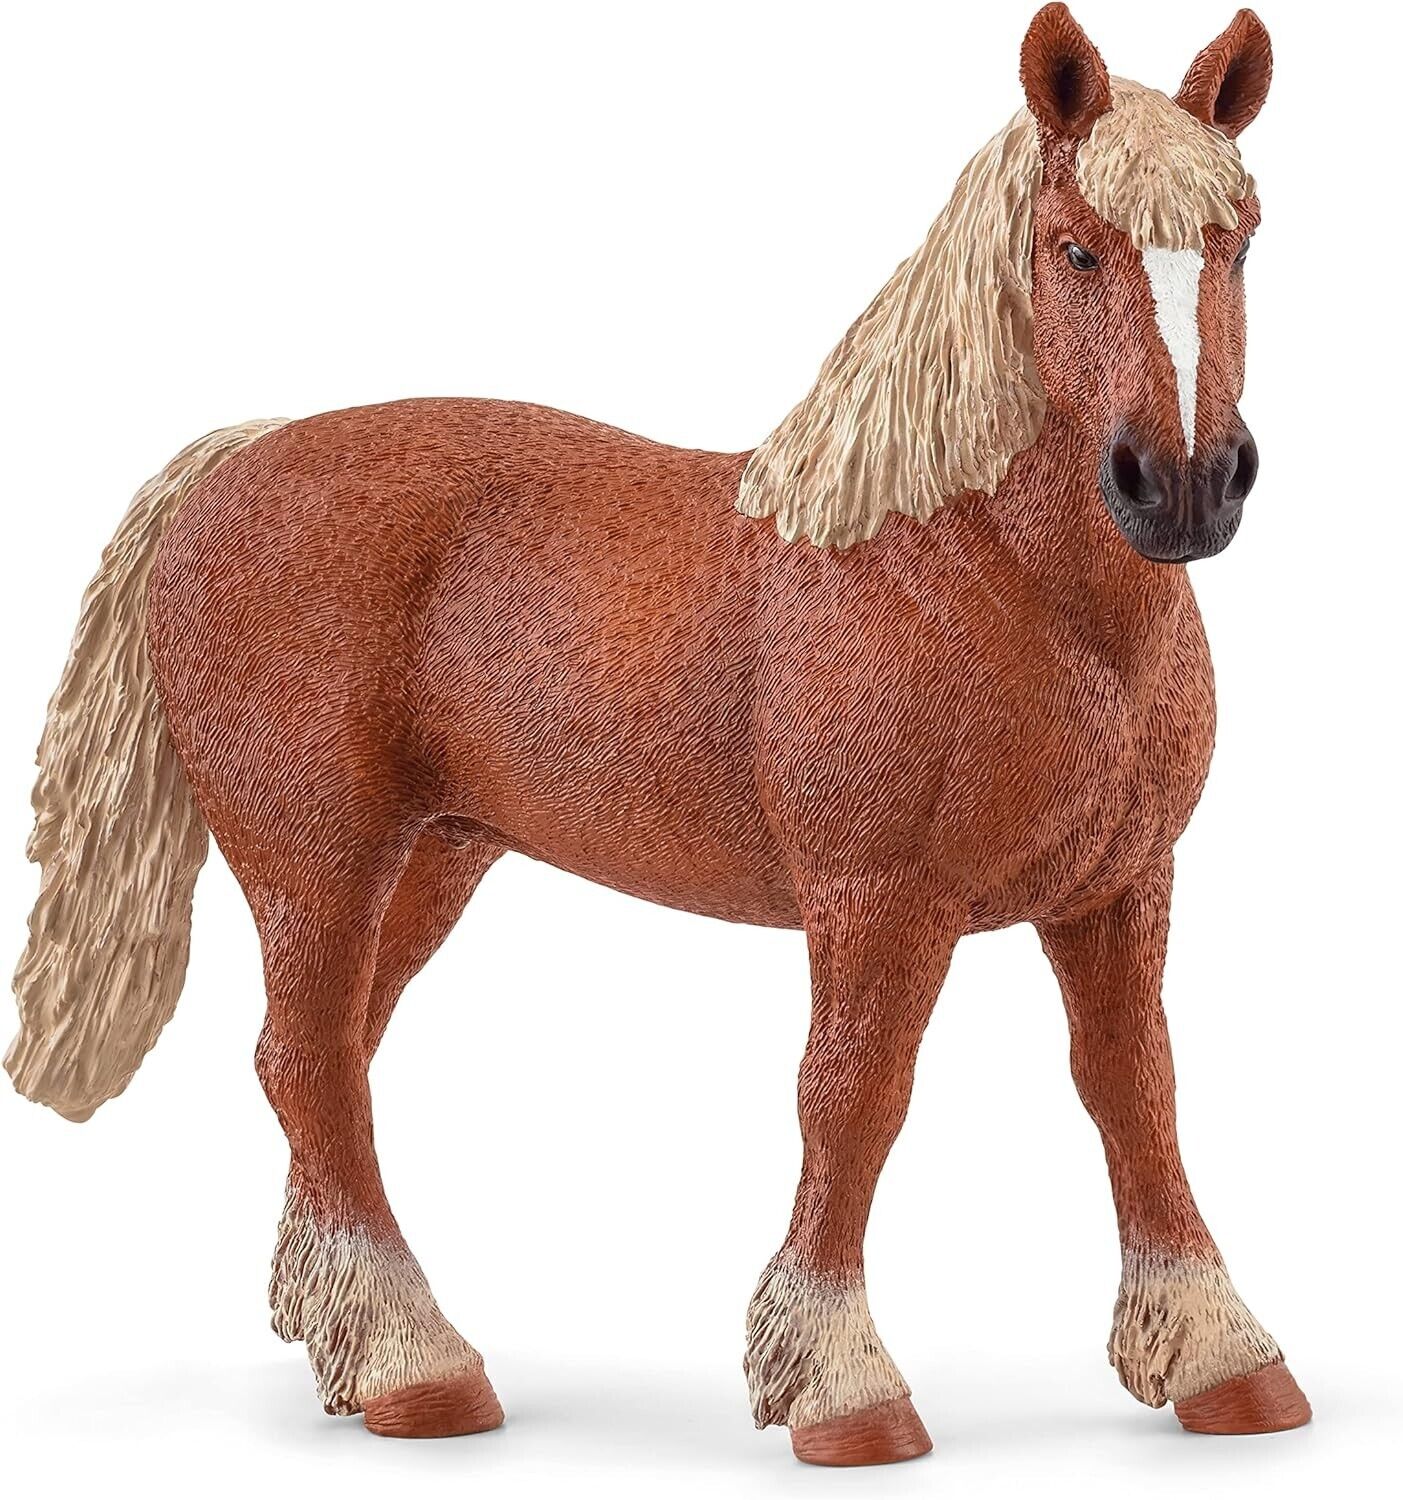 Schleich Farm World Horse Toy for Girls and Boys, Belgian Broodmare Draft Horse